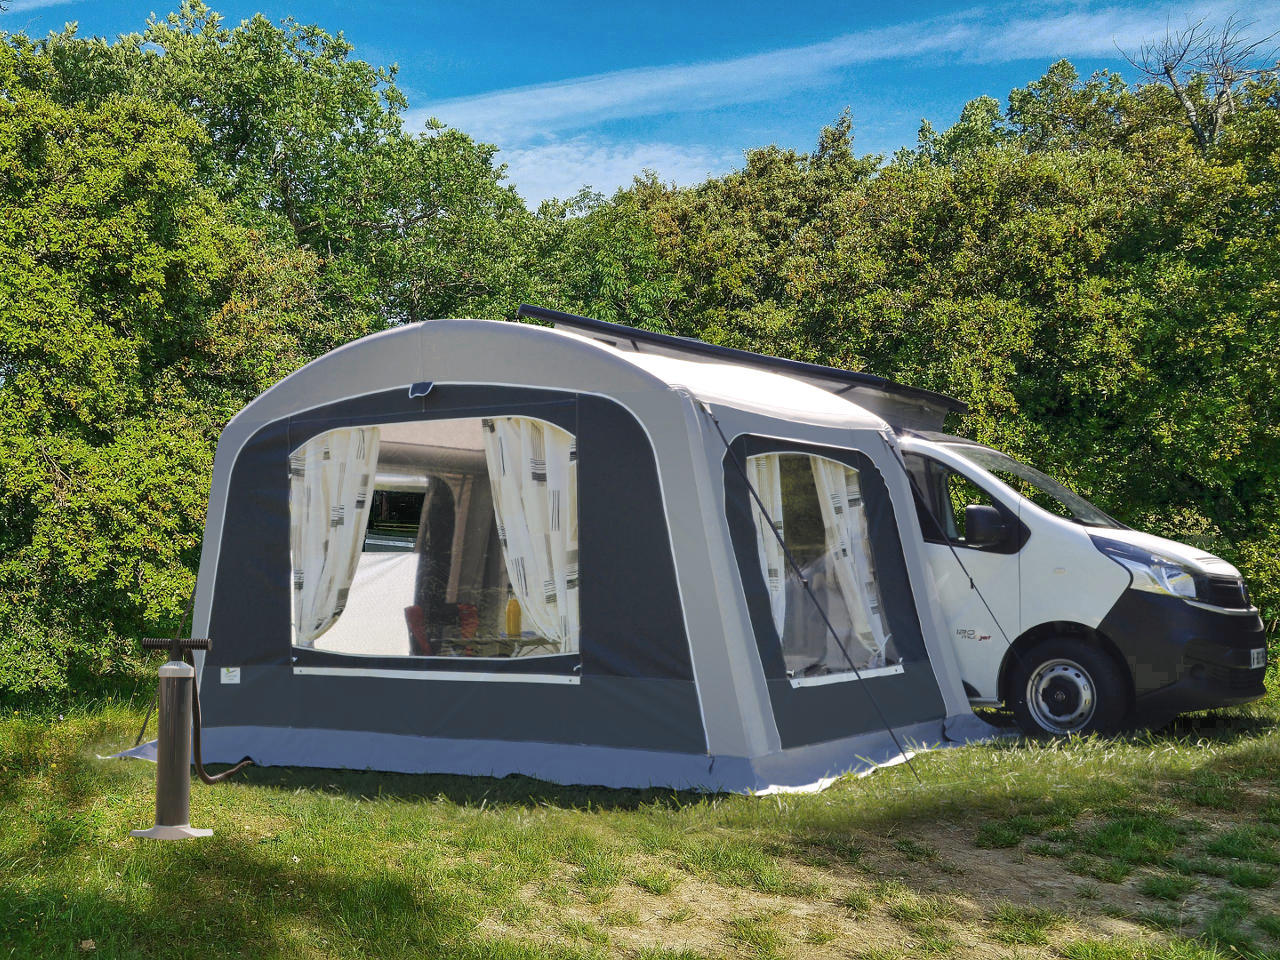 Auvents standards Clairval 2020 : CLAIRVAL Loisirs caravaning